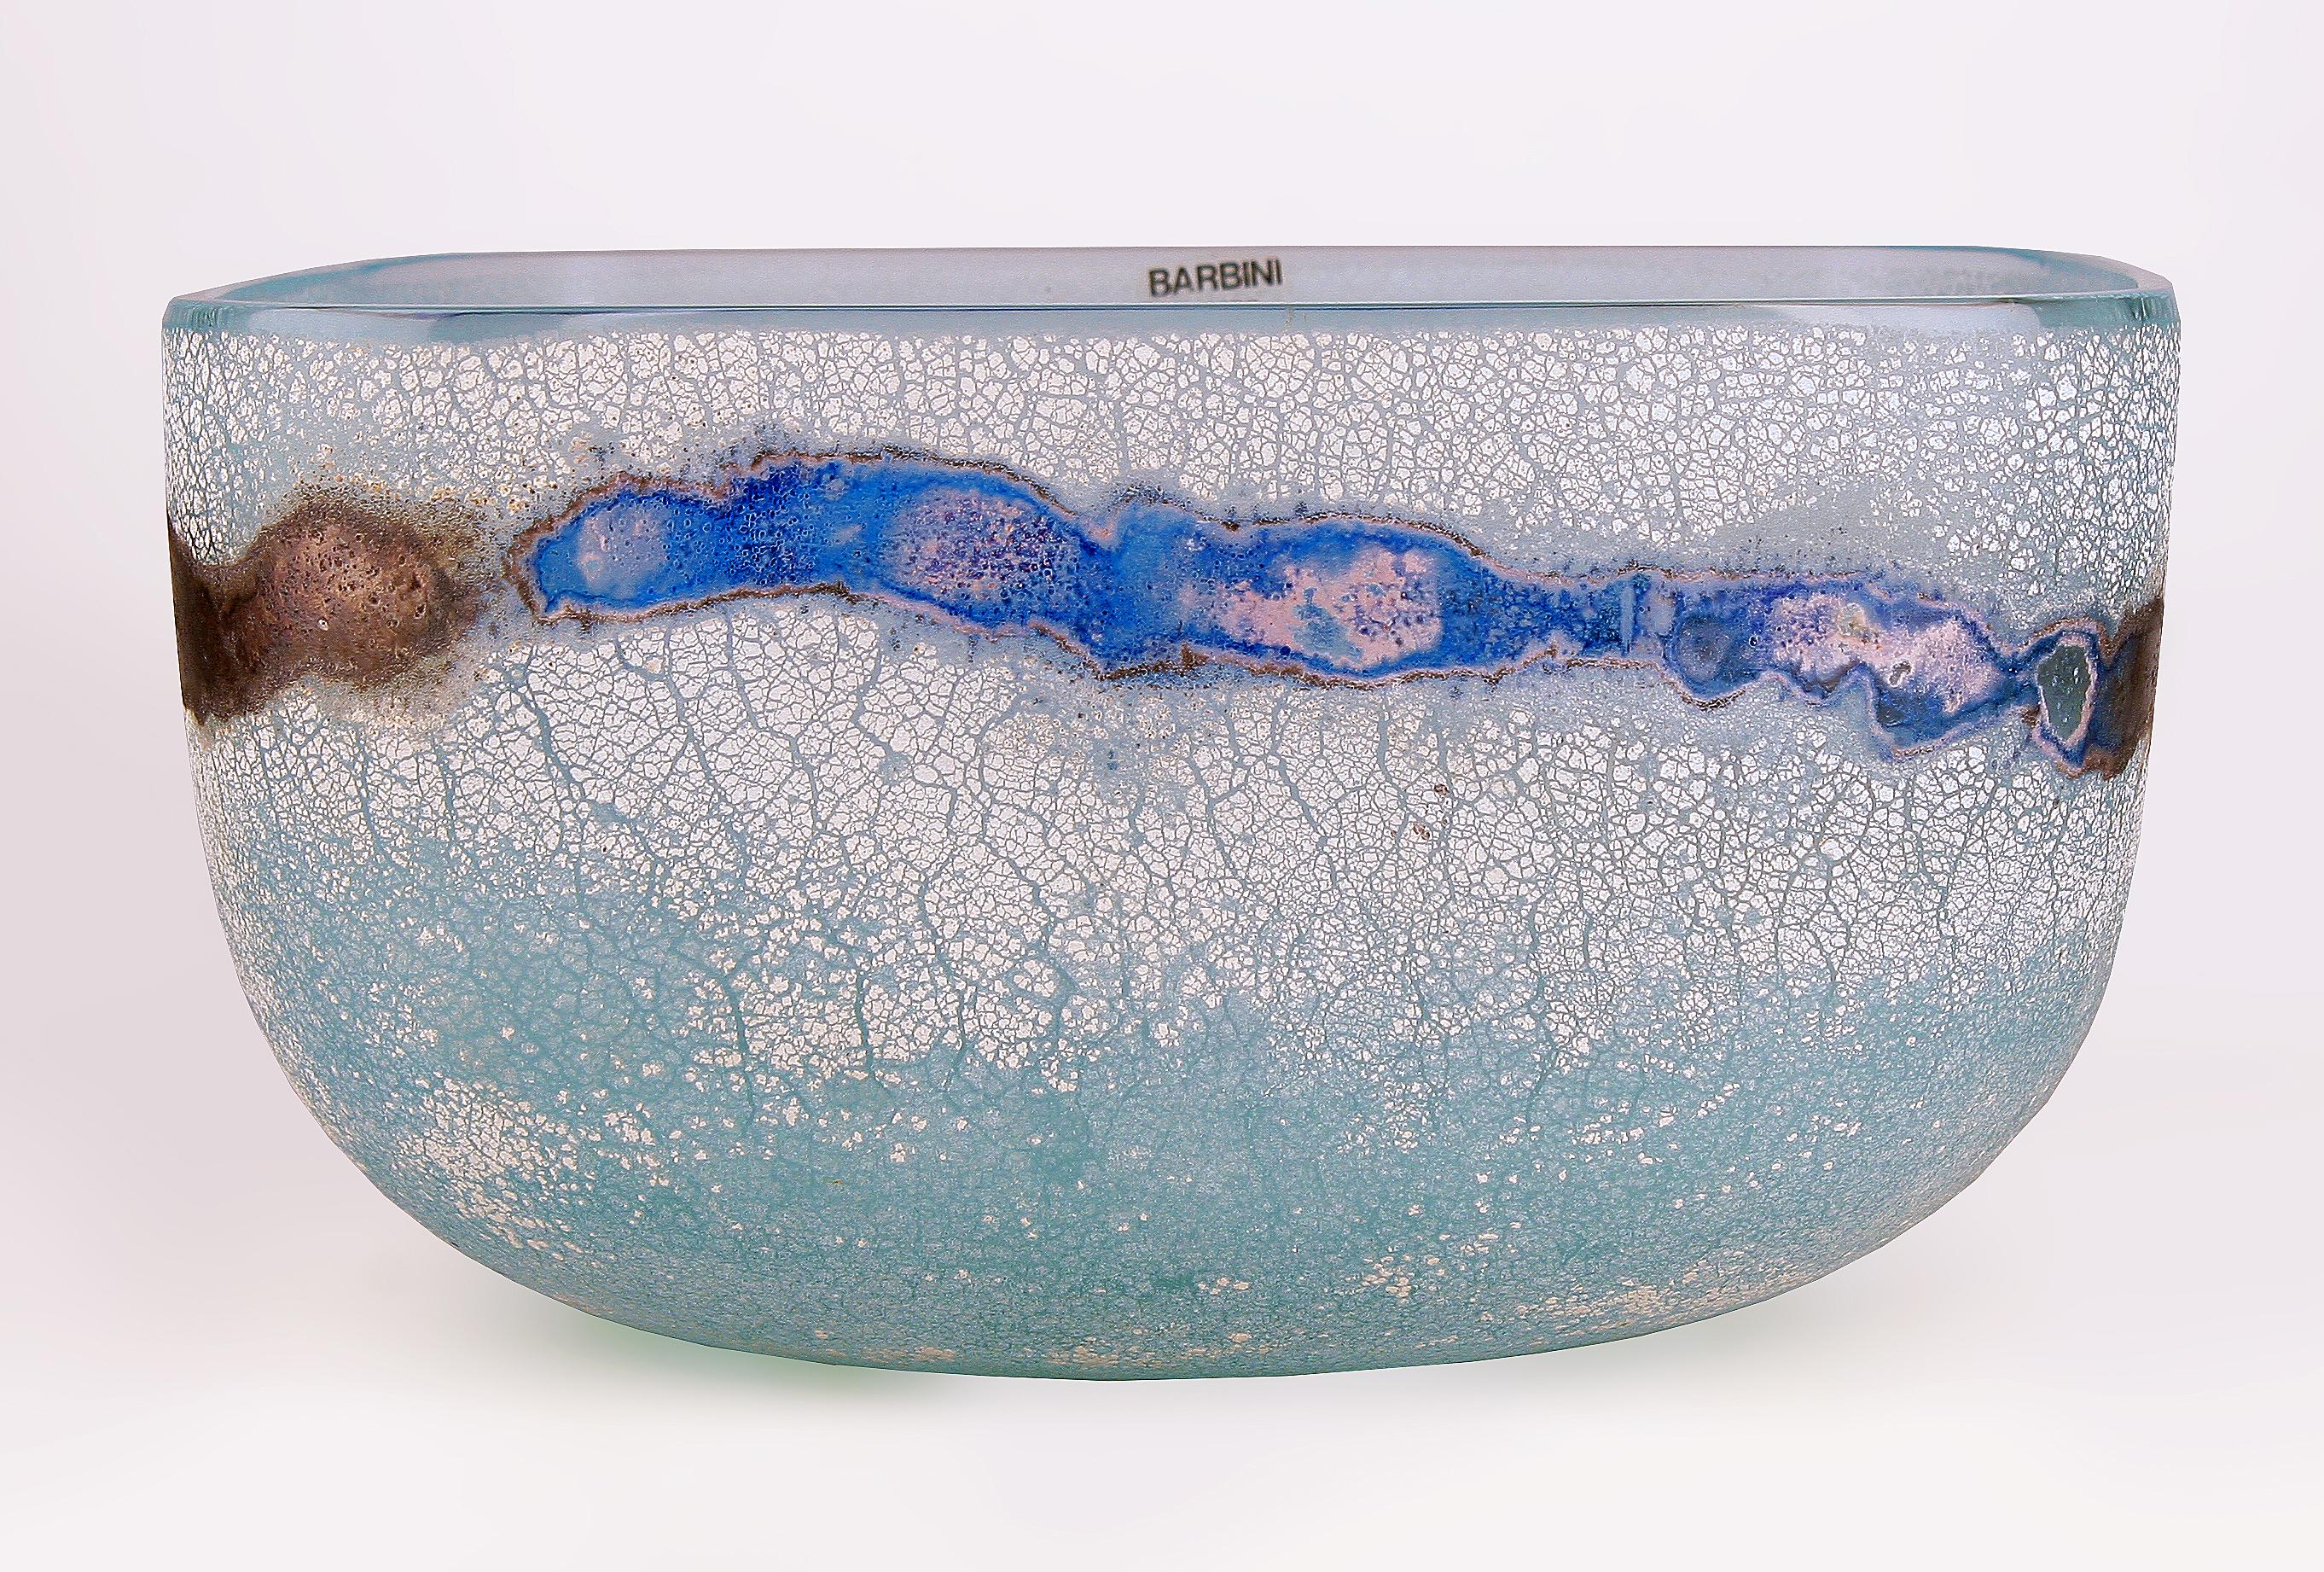 Mid-20th century Modern italian frosted Murano glass decorative scavo bowl by Alfredo Barbini

By: Alfredo Barbini
Material: glass, Murano glass, art glass
Technique: glazed, unglazed, cast, frosted
Dimensions: 4 in x 2 in
Date: mid-20th century,